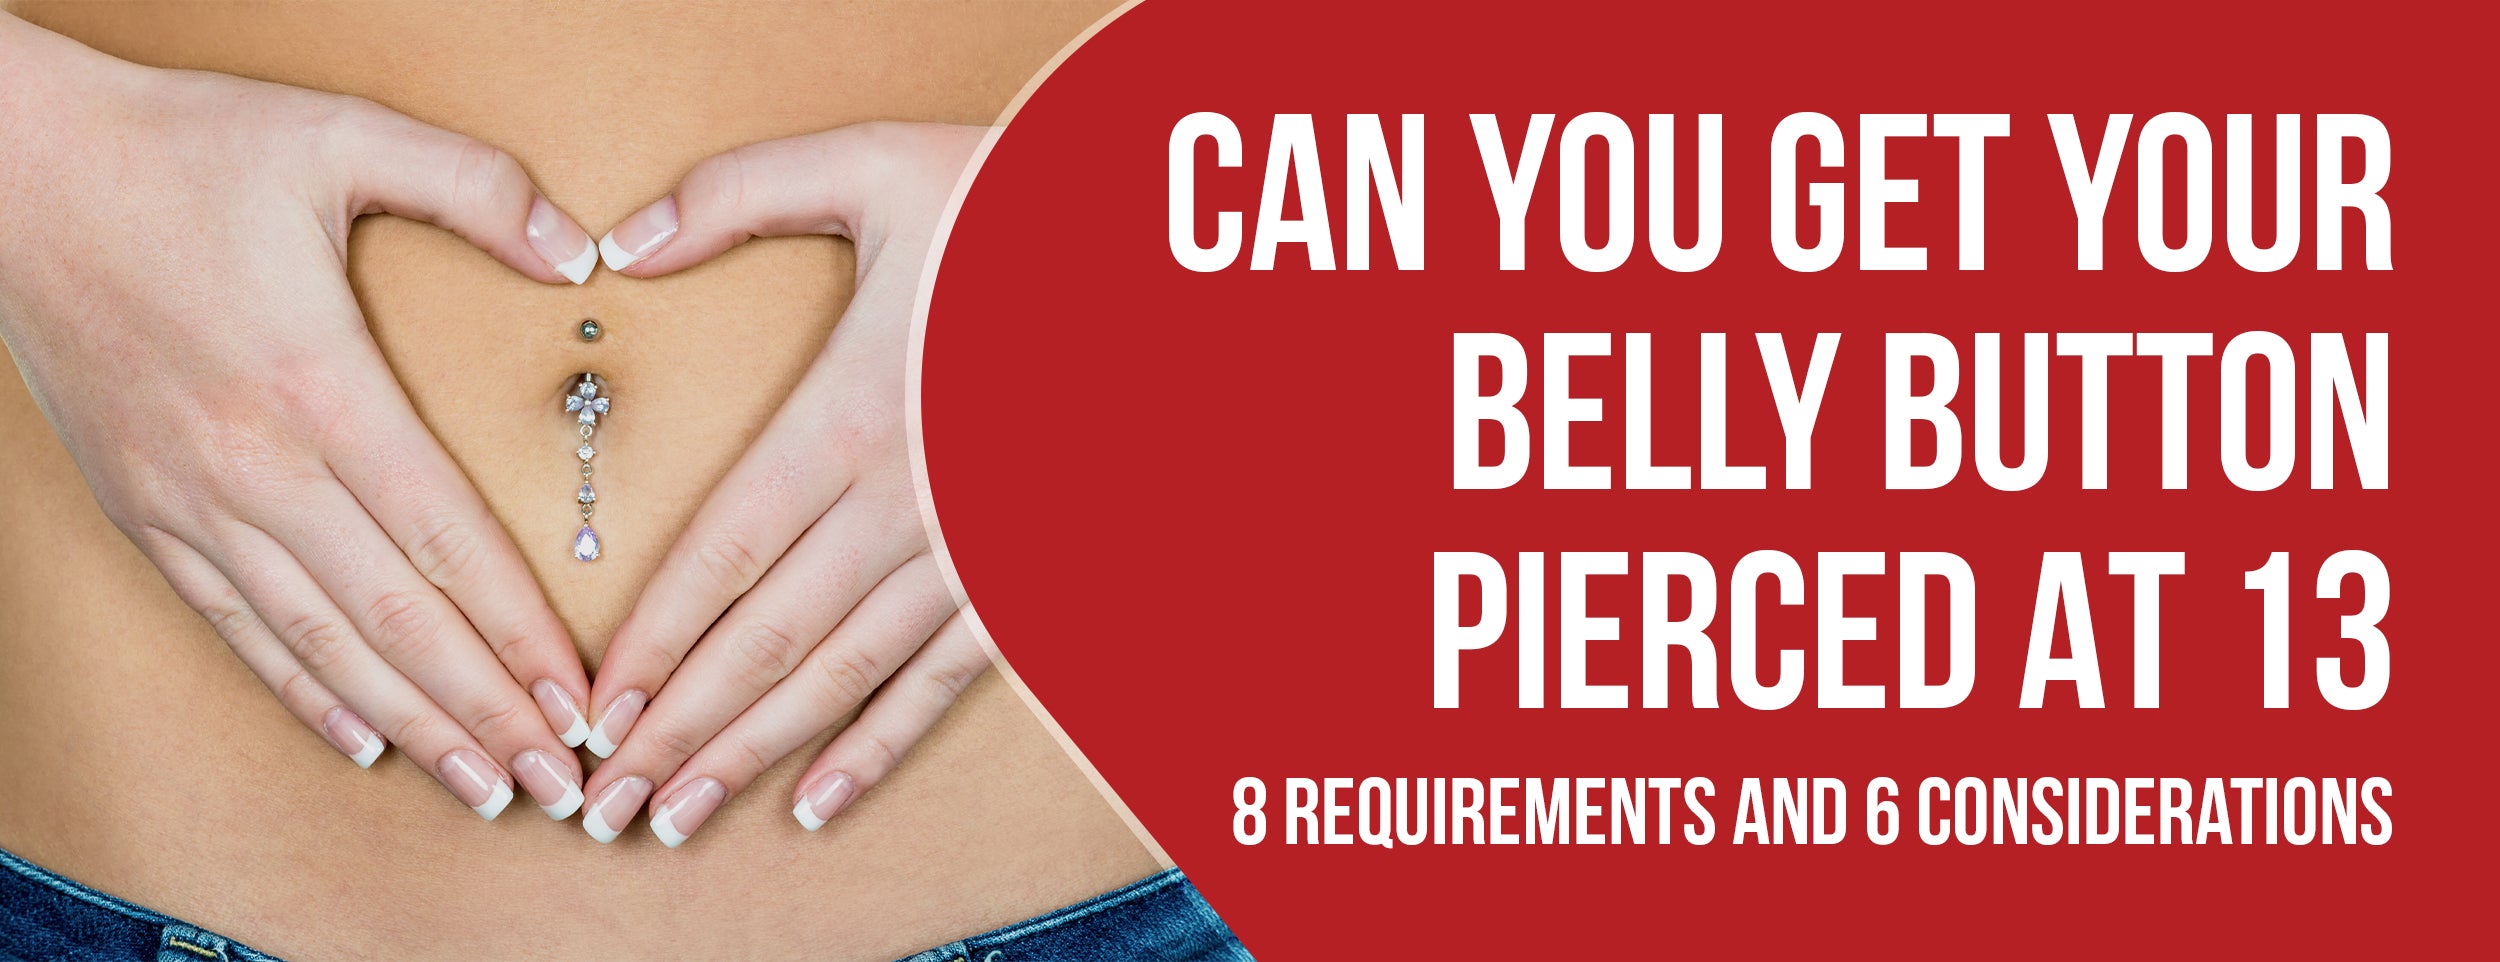 Belly Button Piercing at 13, 8 Requirements [6 considerations]